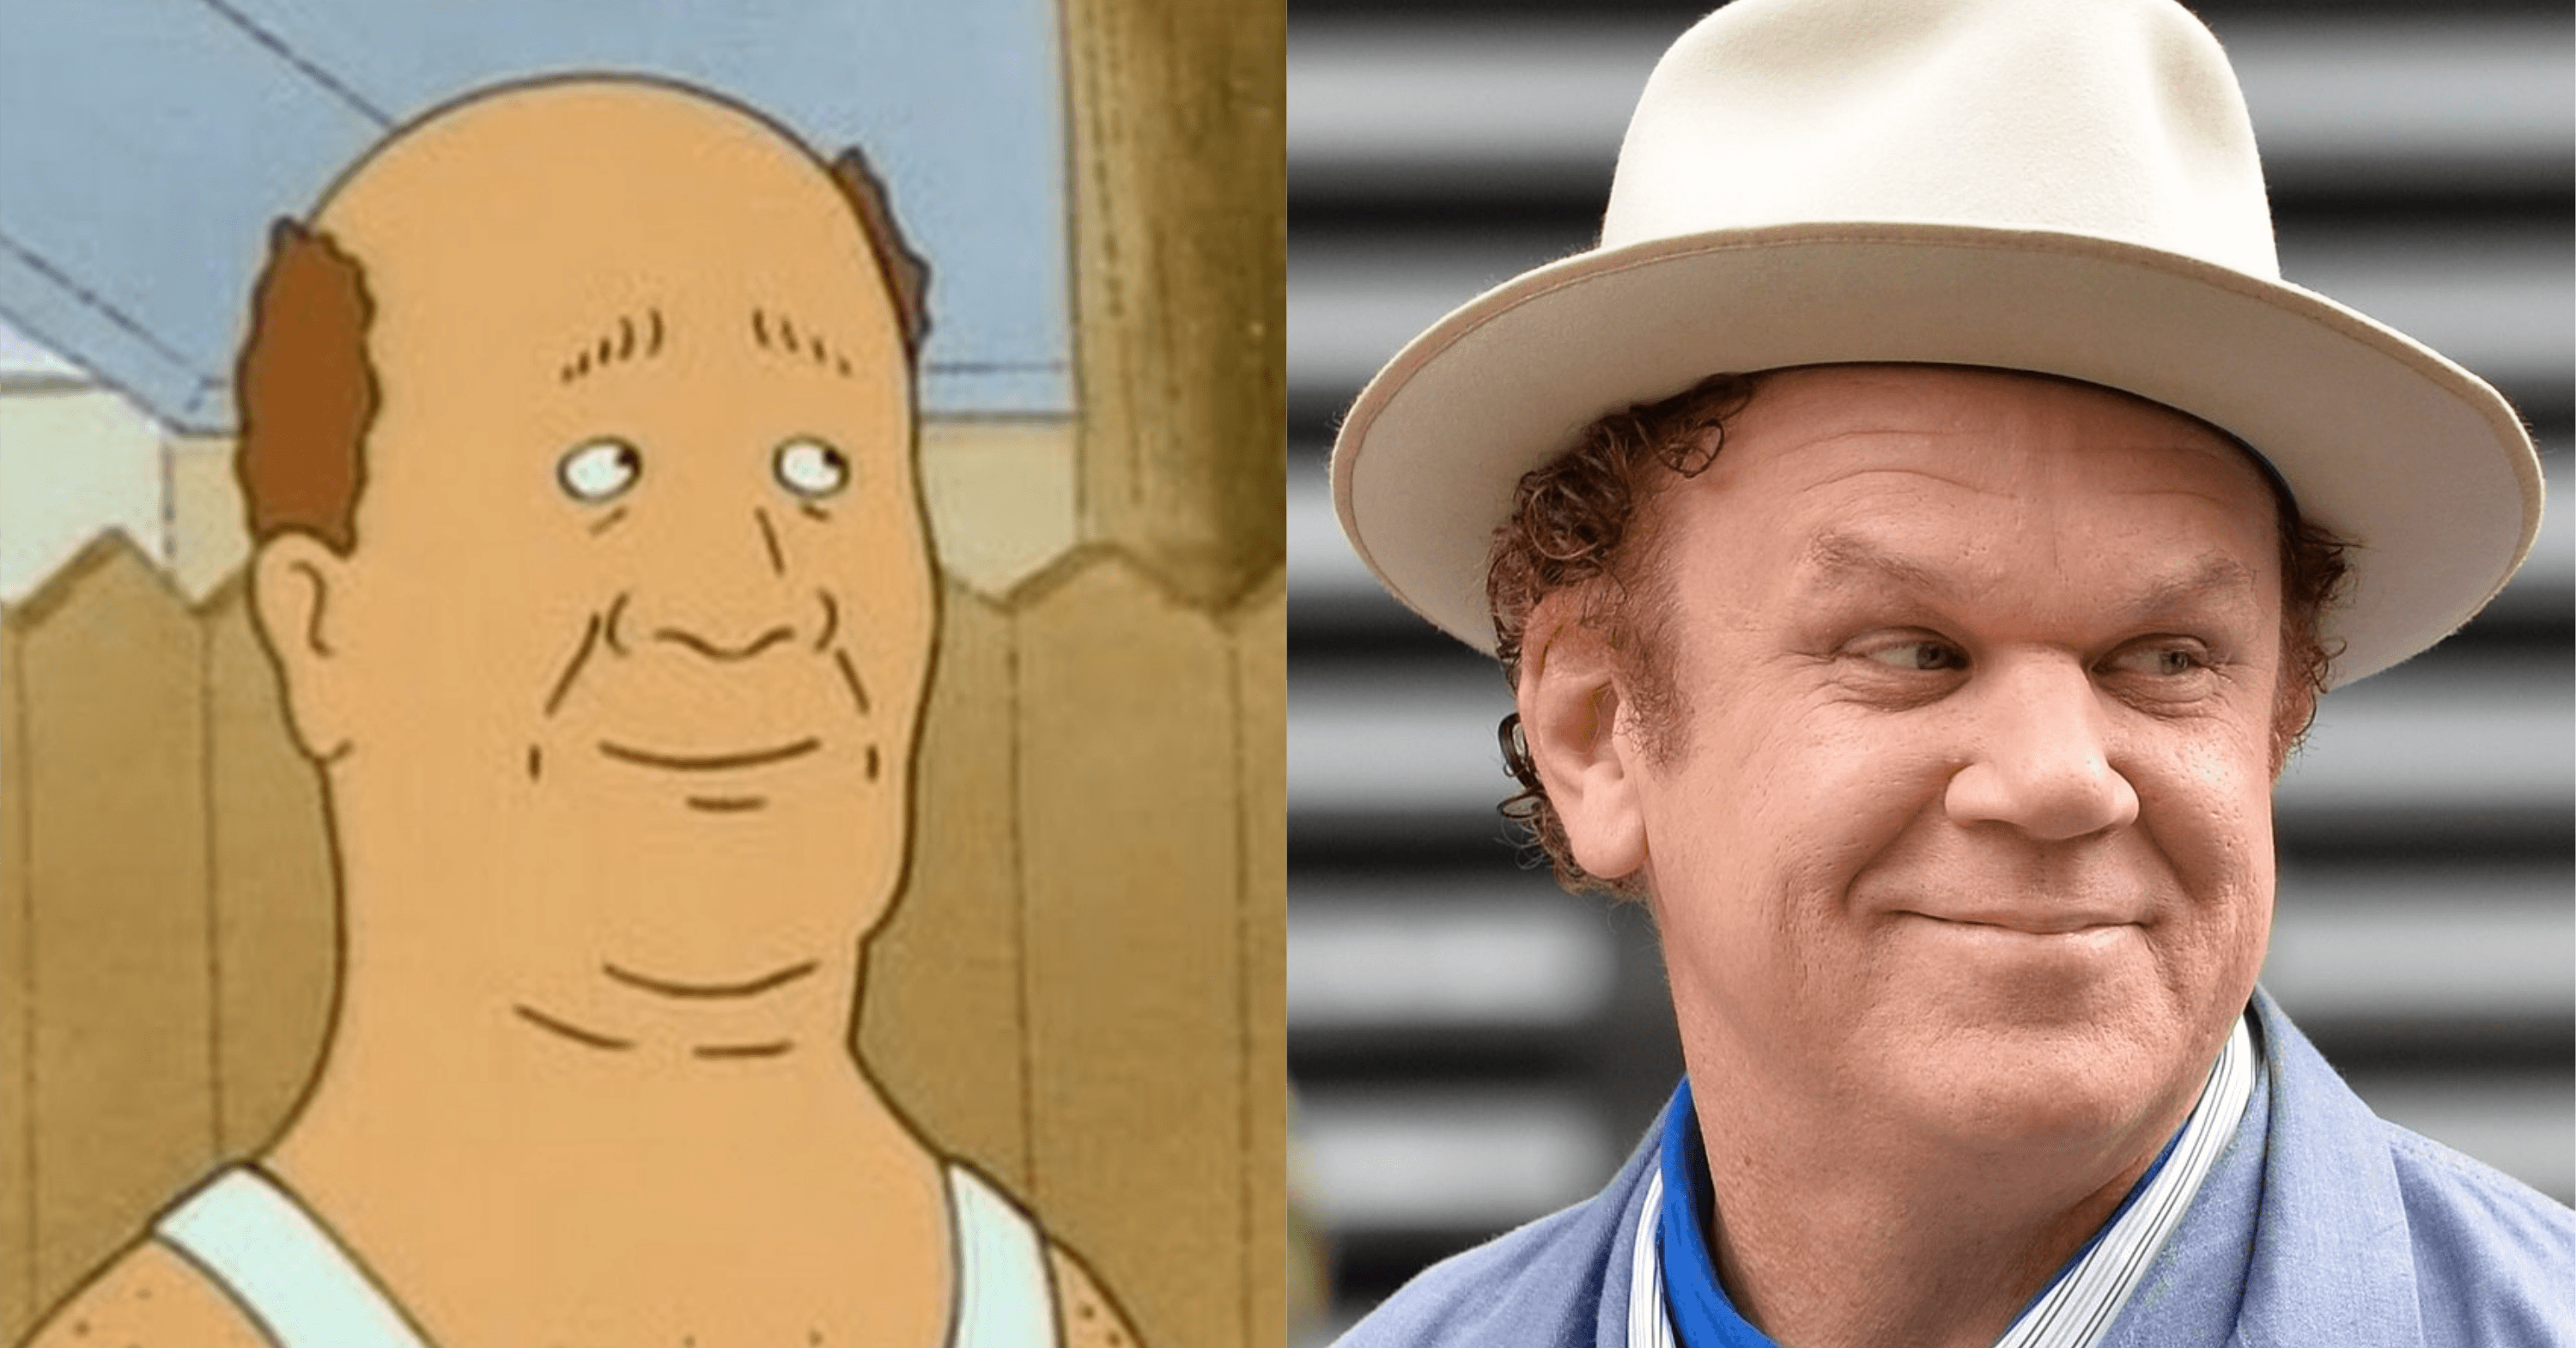 The Cast of King of the Hill in Other Roles : r/KingOfTheHill